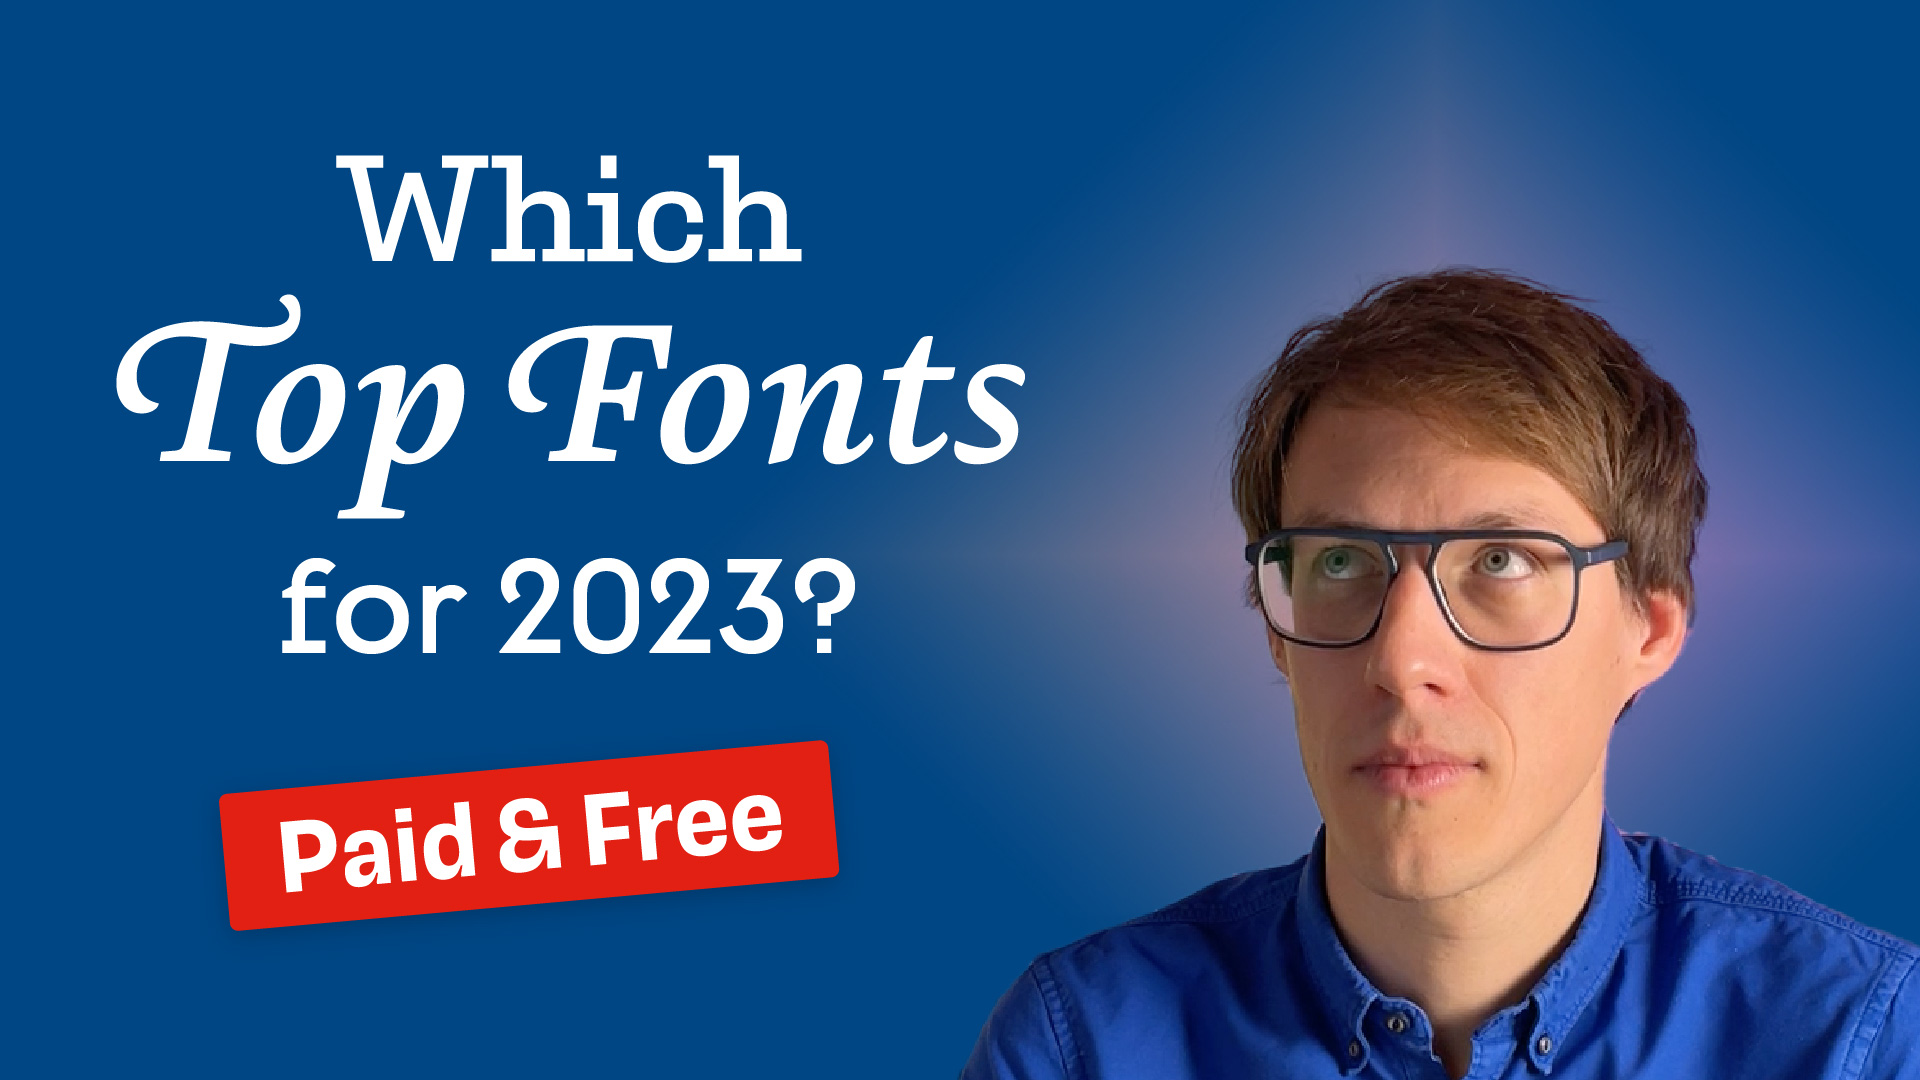 Top Fonts For 2023 1 